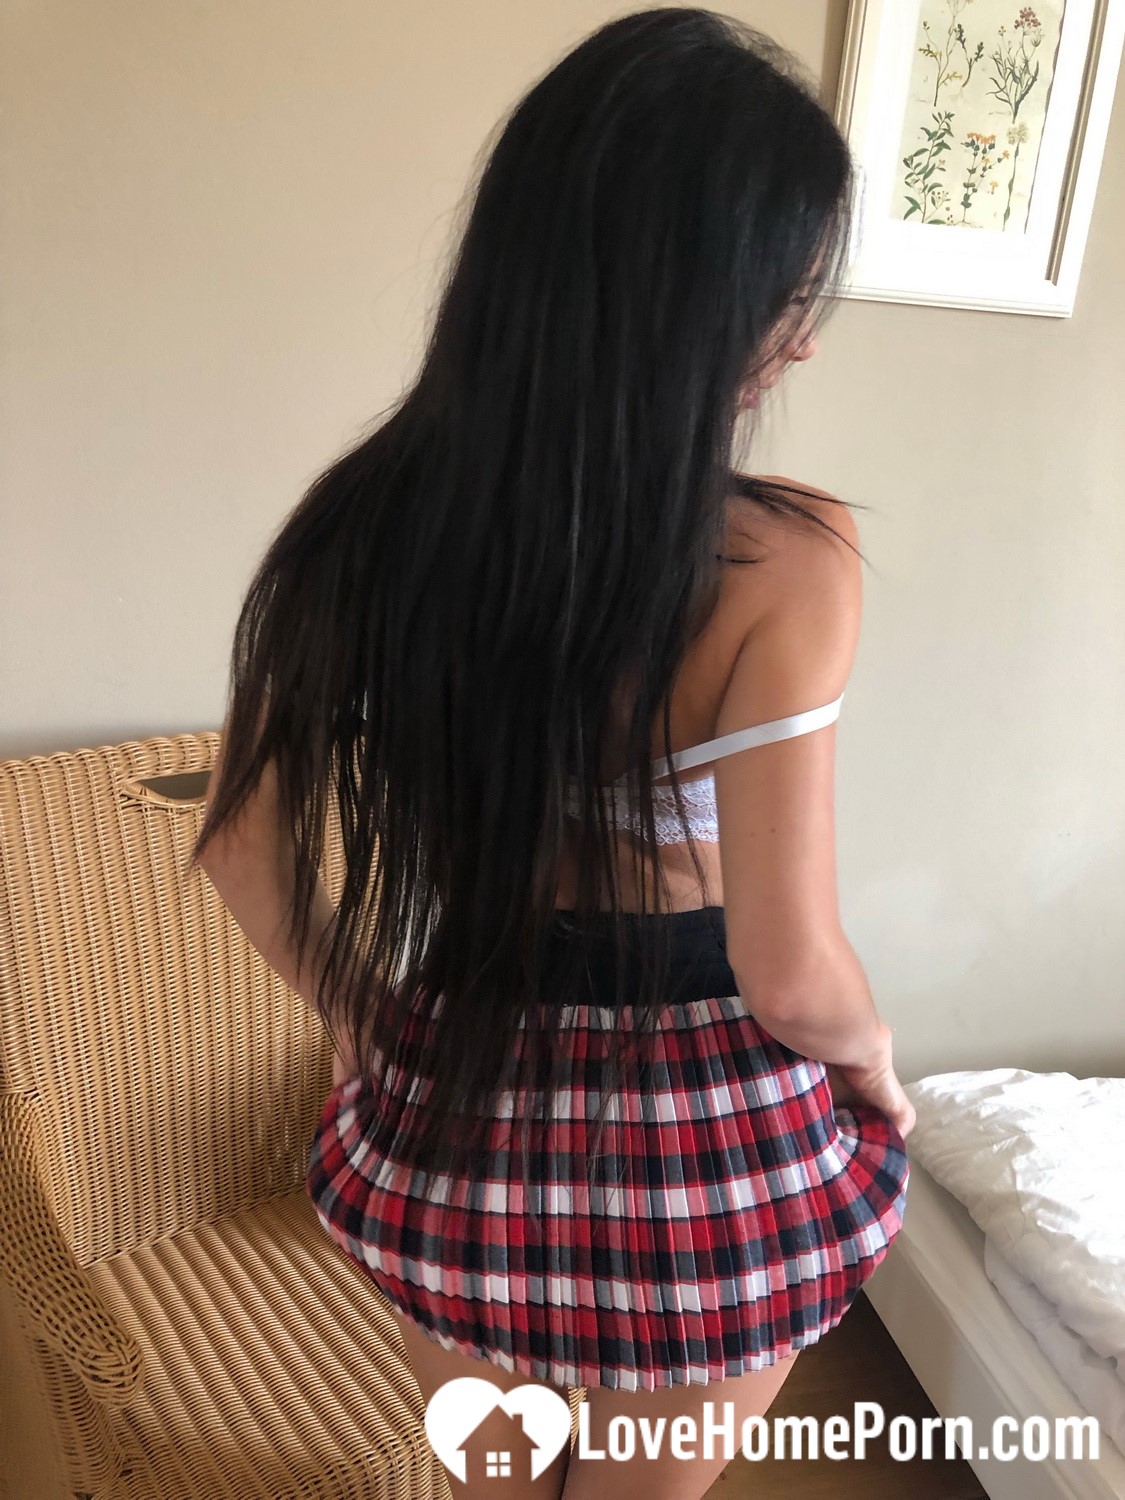 Hot schoolgirl loves to show off everything